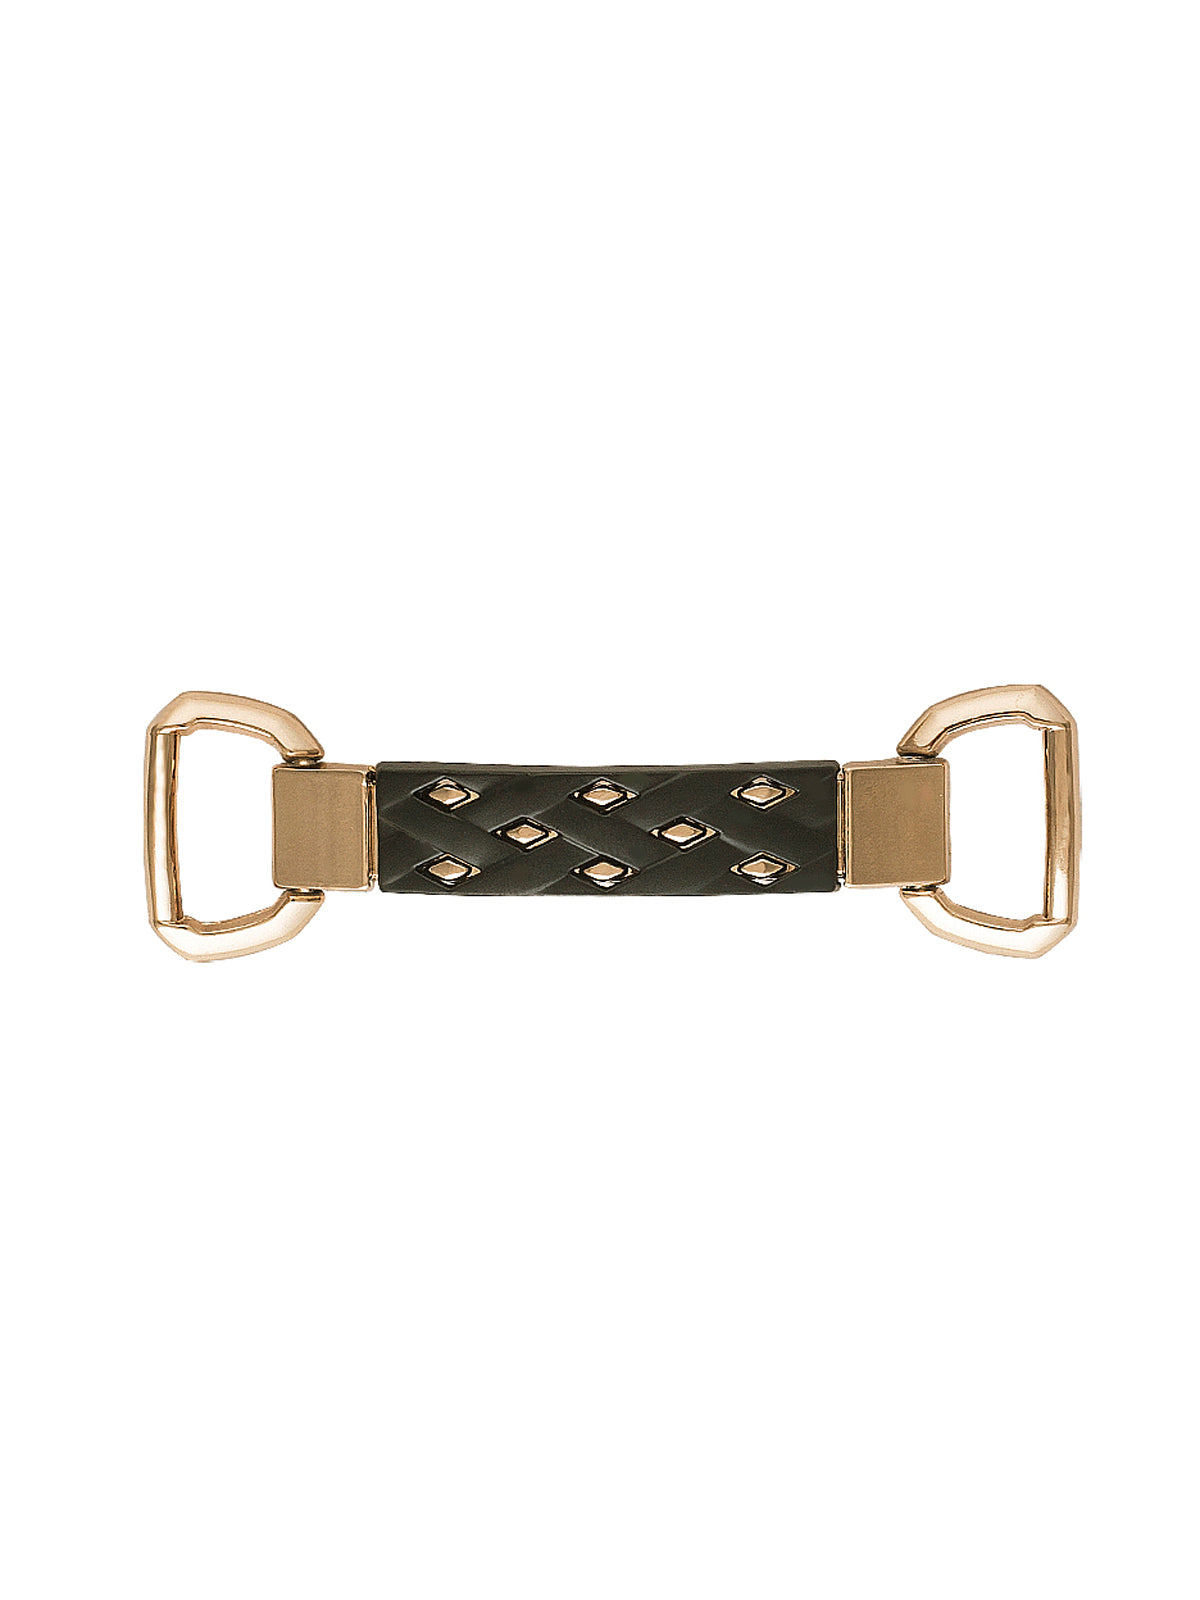 Classic Shiny Gold with Black Decorative Belt Accessory